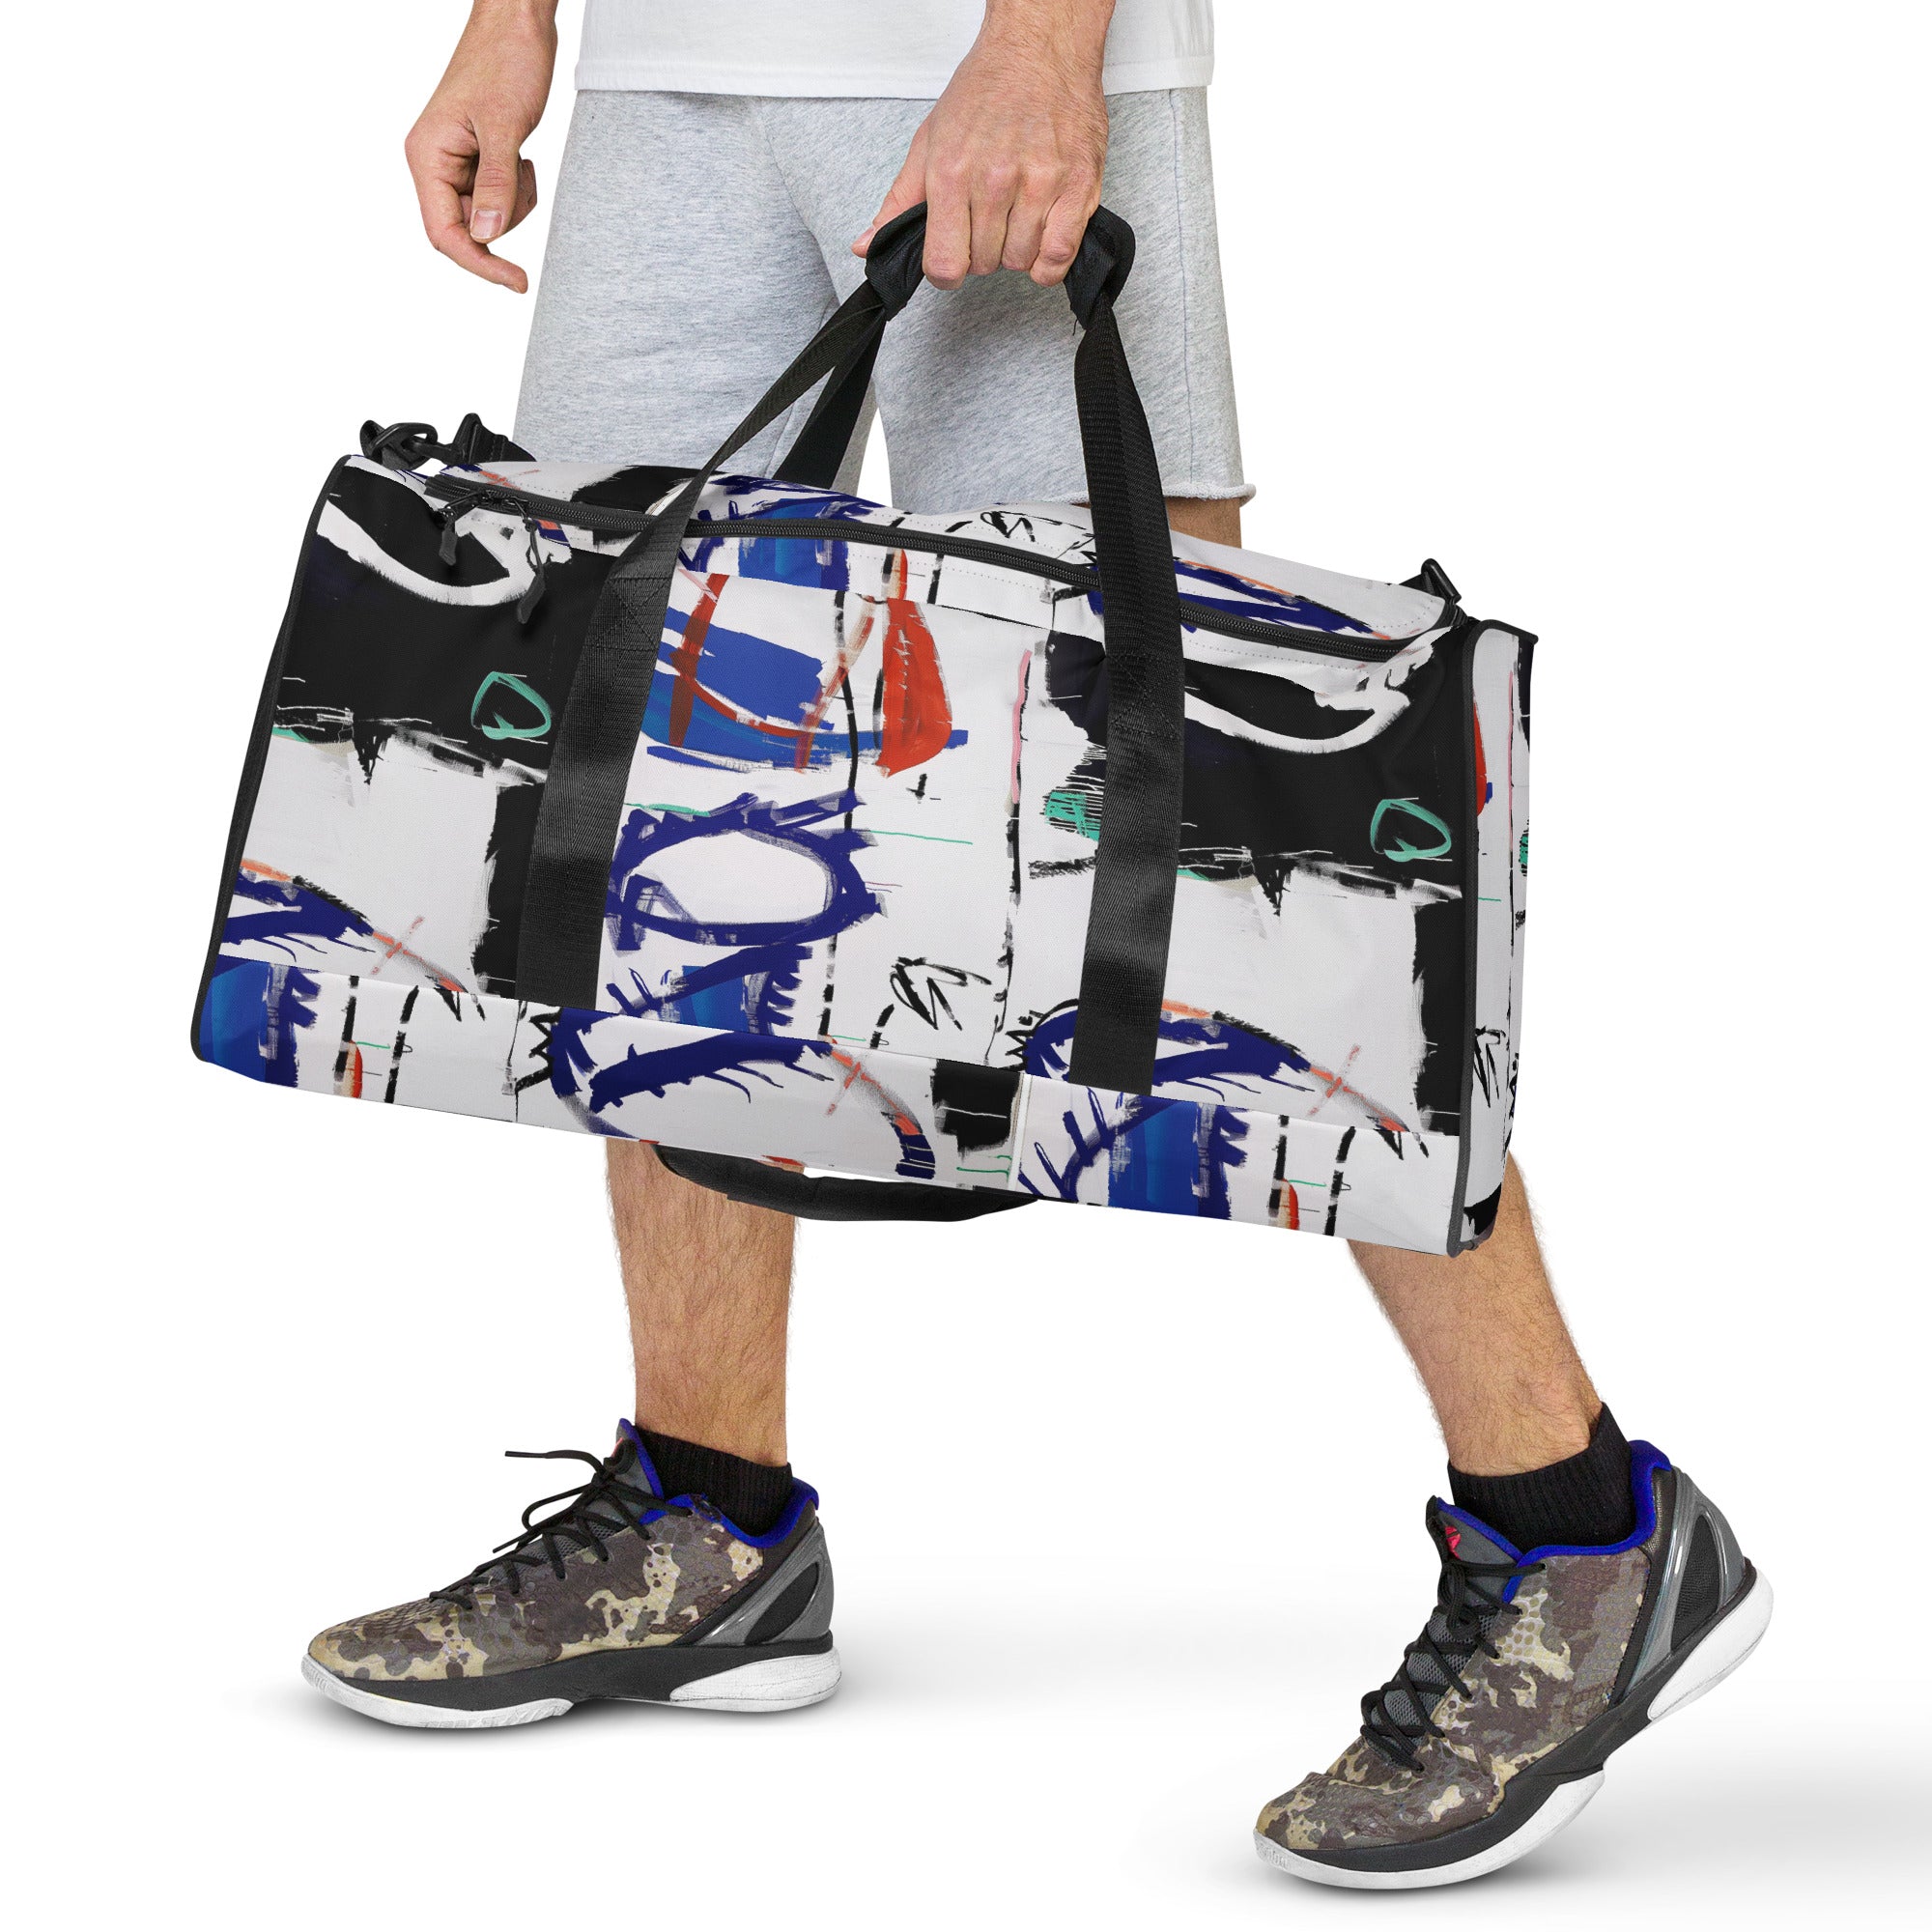 Aren® All-Over Print Duffle Bag (Limited)